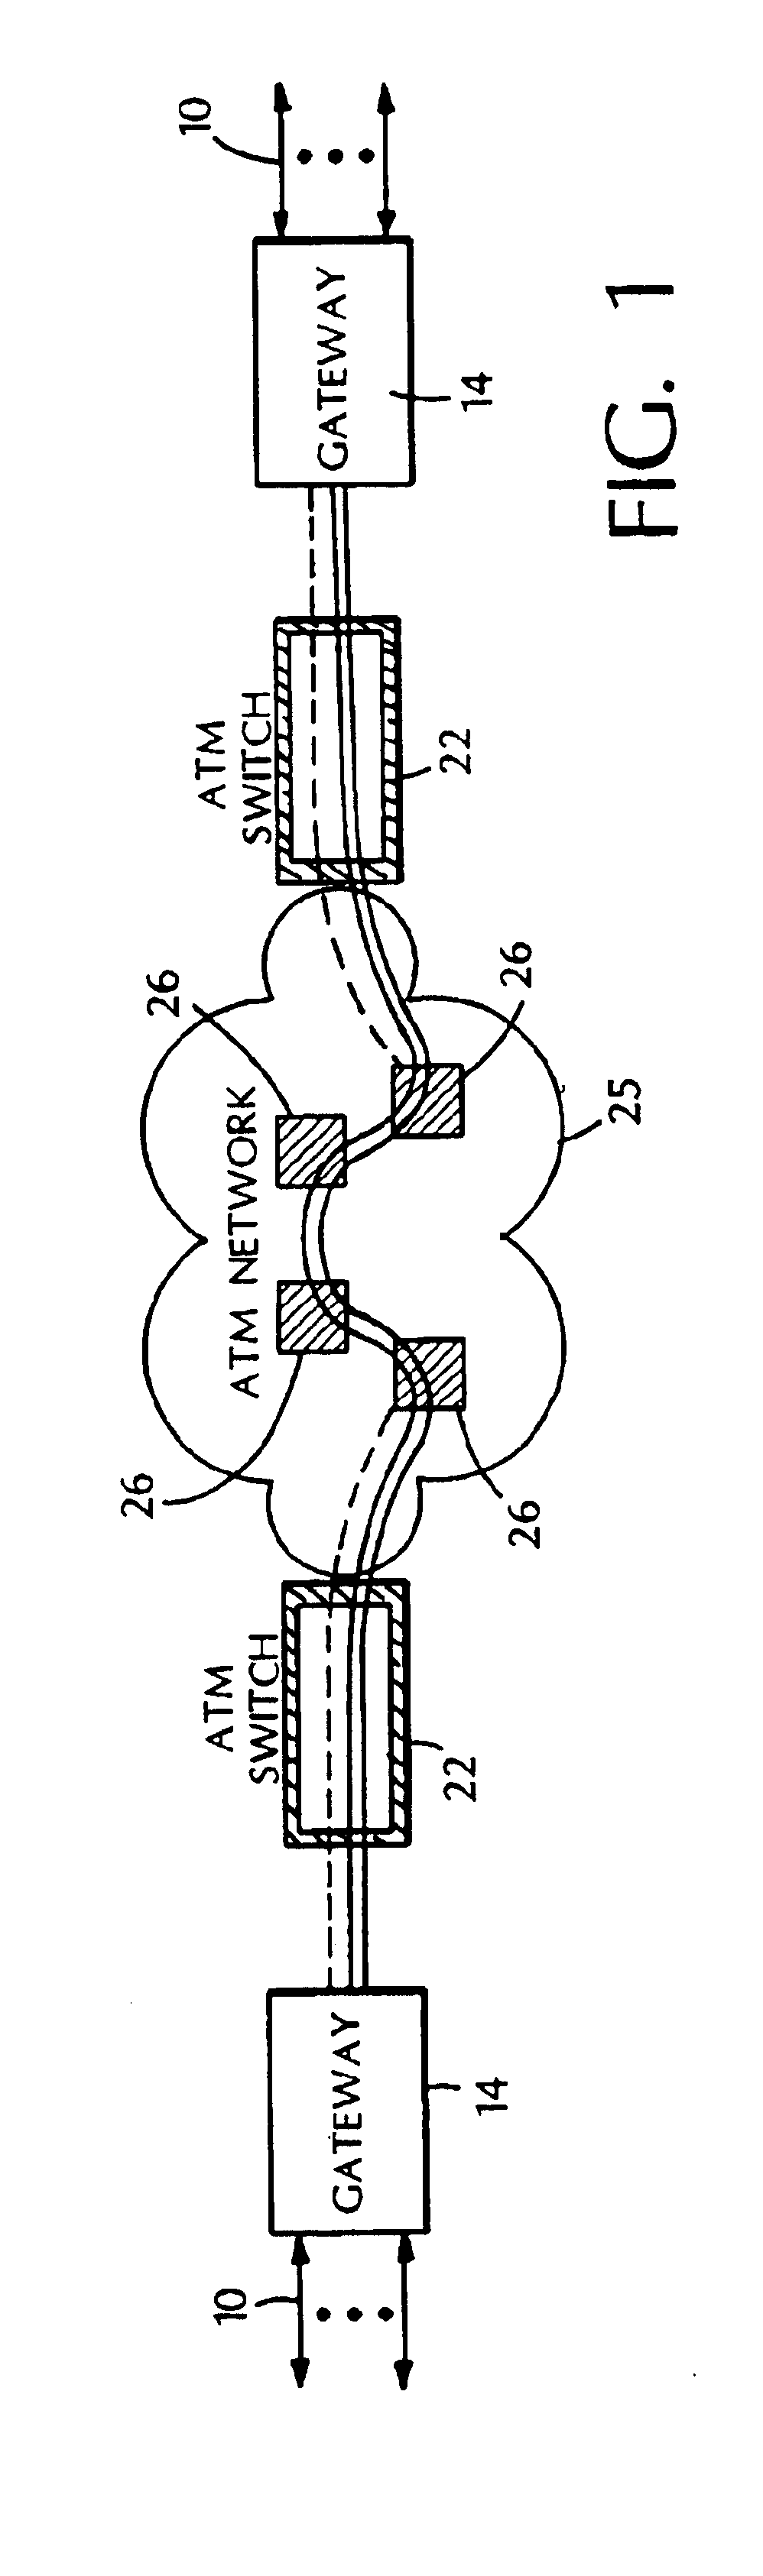 Private lines traversing a packet network and re-arrangement of channels among packet network connections